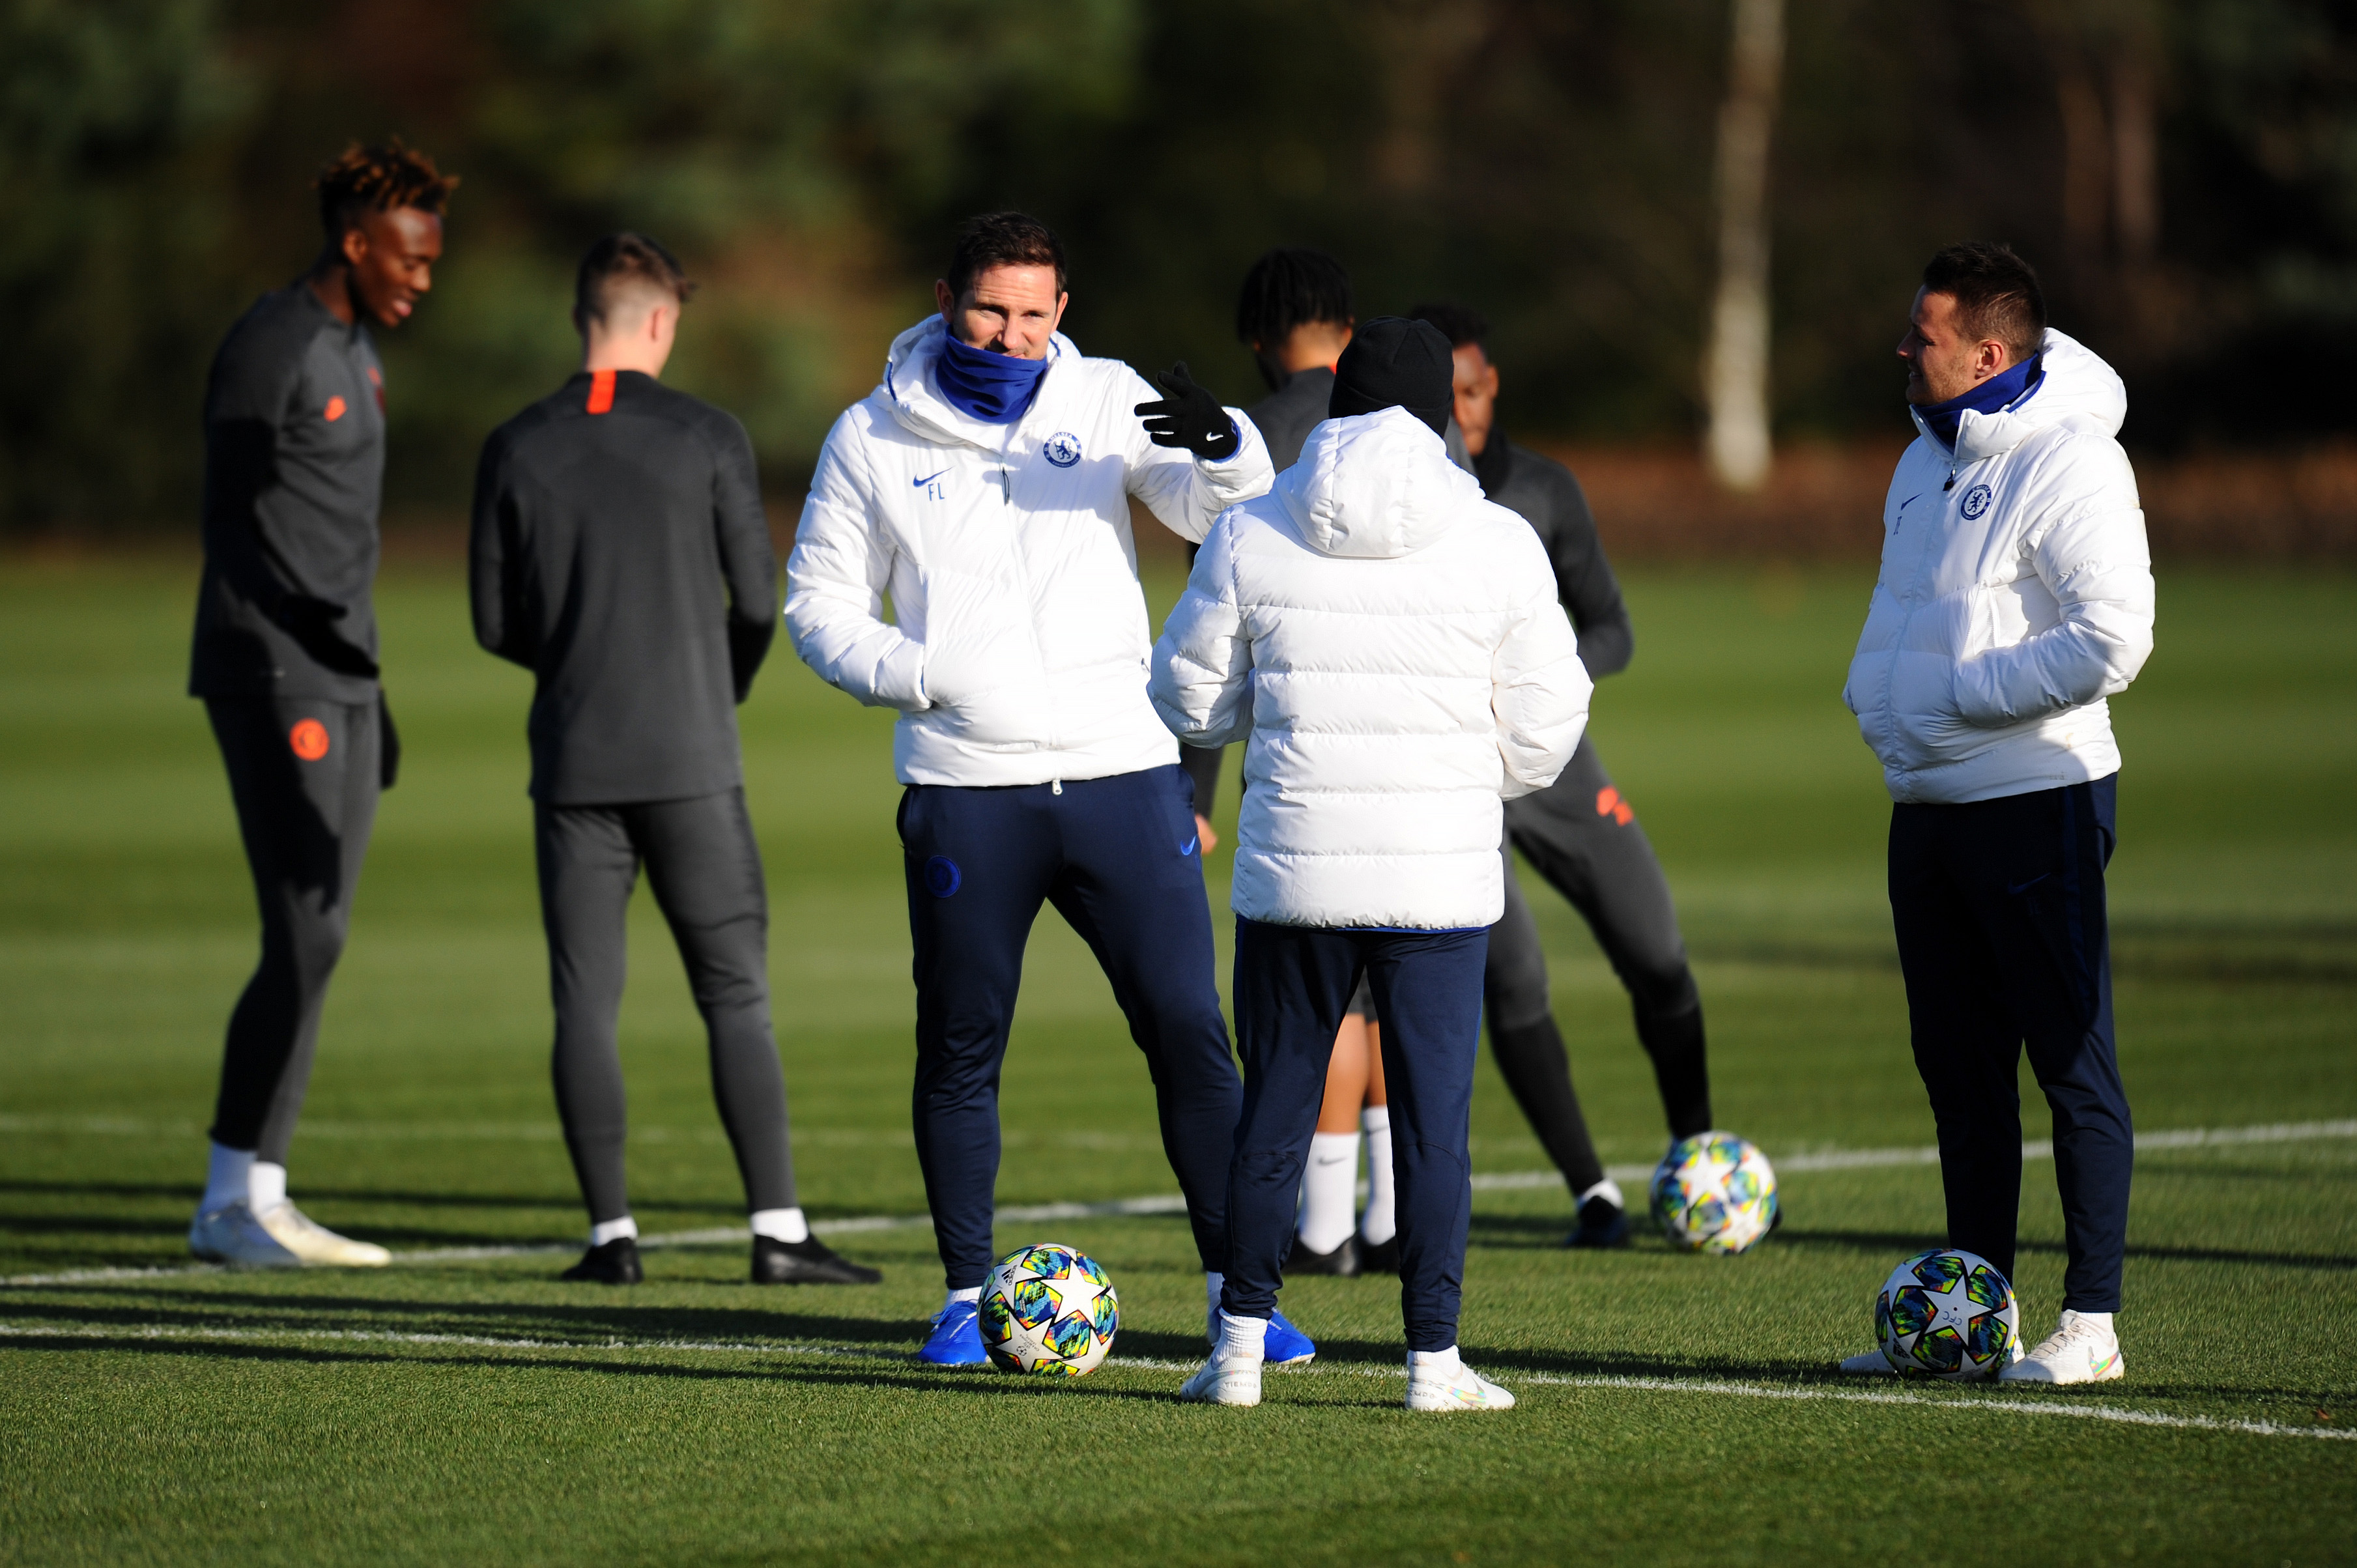 COBHAM, ENGLAND - DECEMBER 09: Frank Lampard, Manager of Chelsea speaks to one of his backroom staff during a training session ahead of their UEFA Champions League Group H match against Lille OSC at Chelsea Training Ground on December 09, 2019 in Cobham, England. (Photo by Alex Burstow/Getty Images)